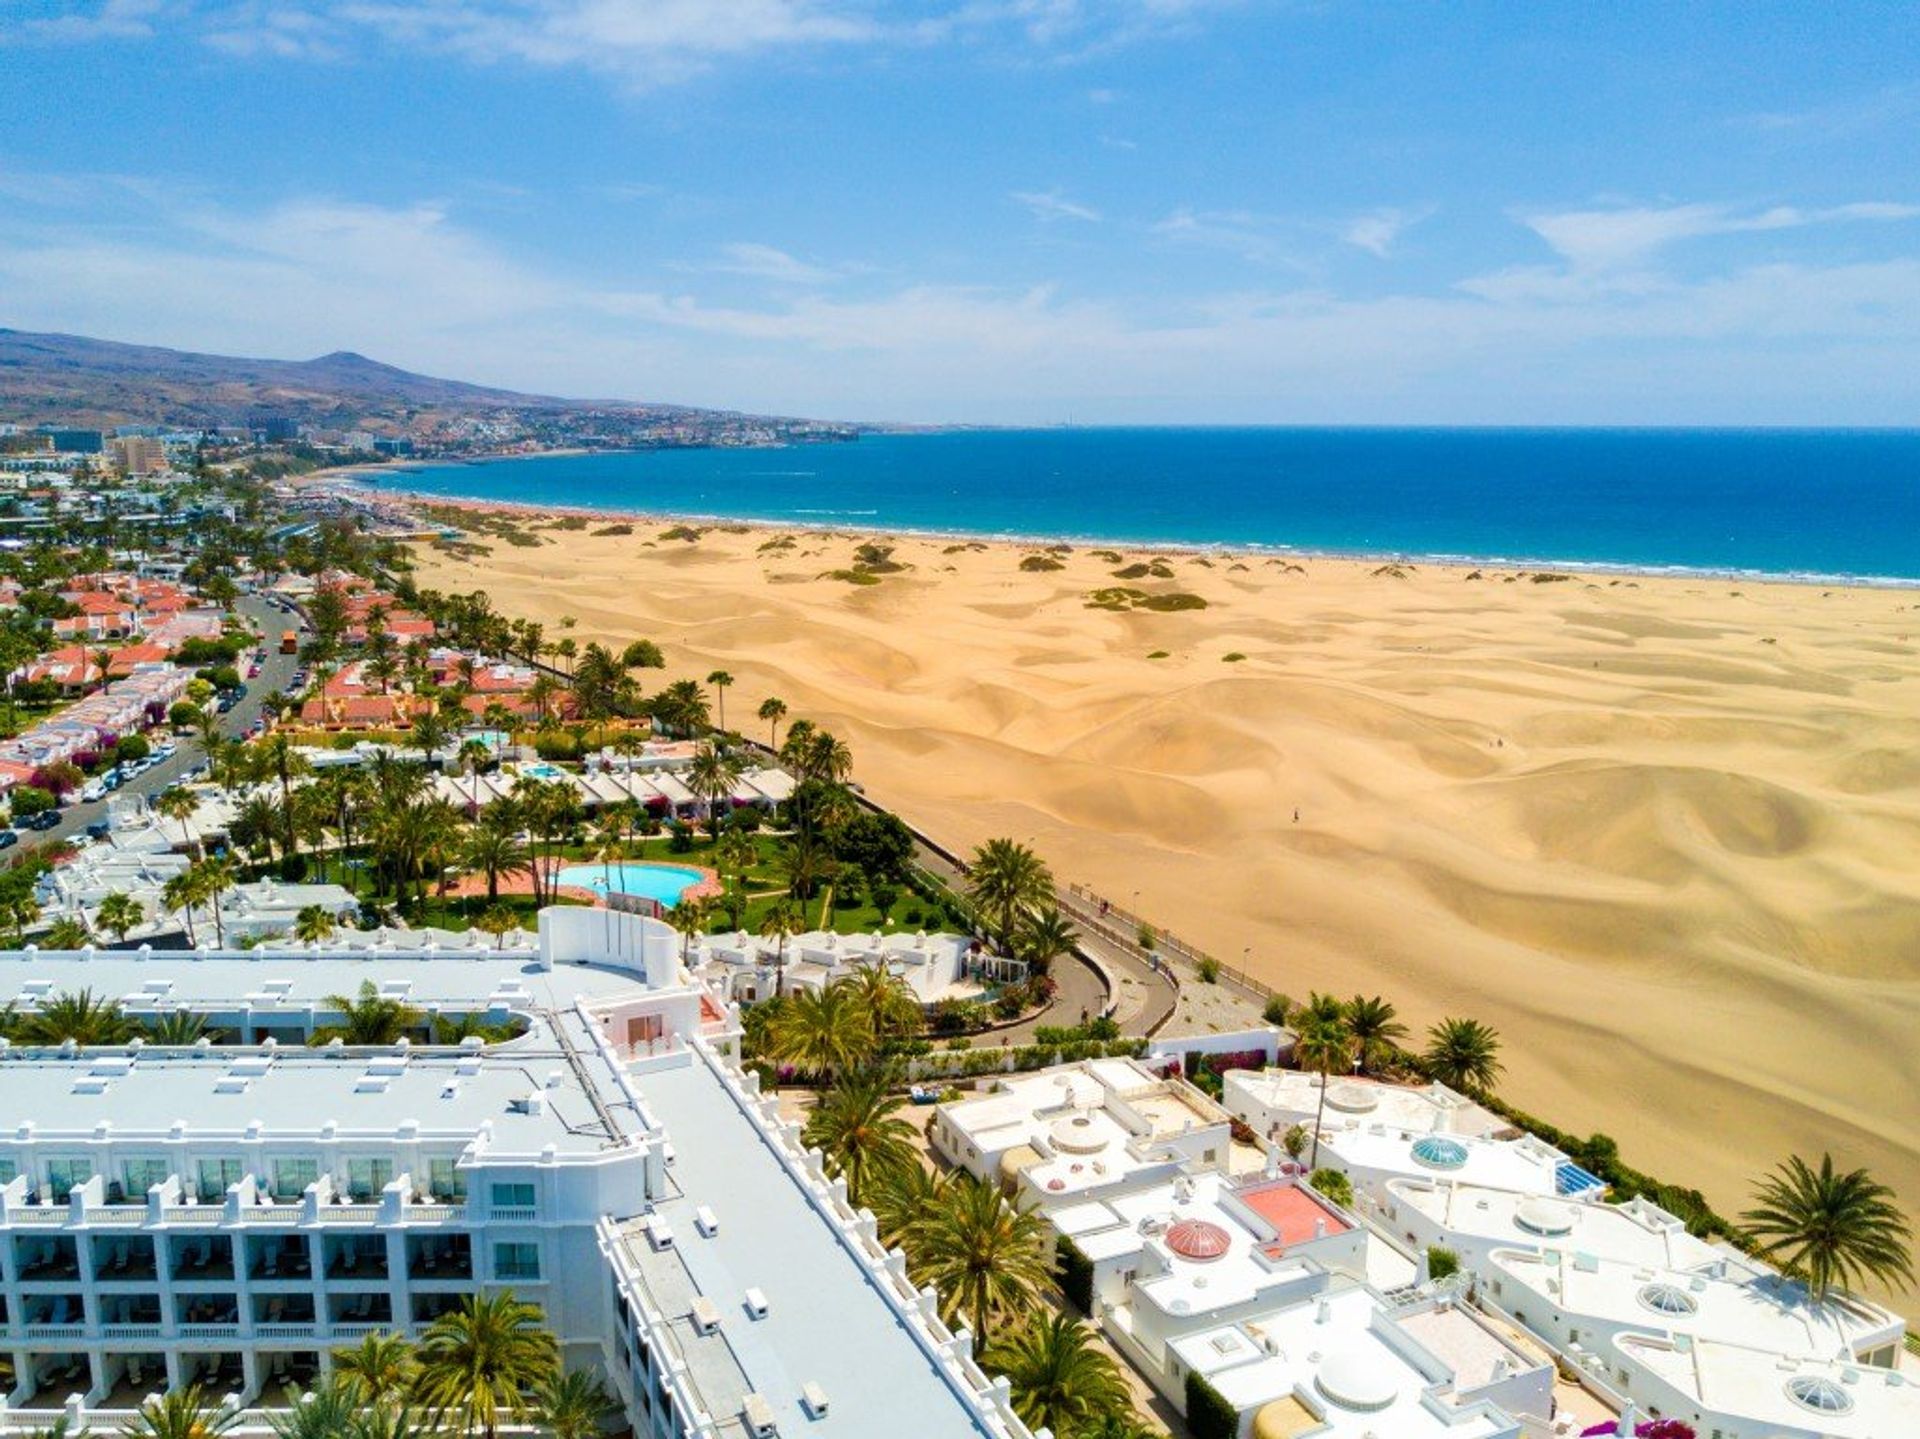 The glorious golden sands and dunes of the coast attract thousands of visitors each year